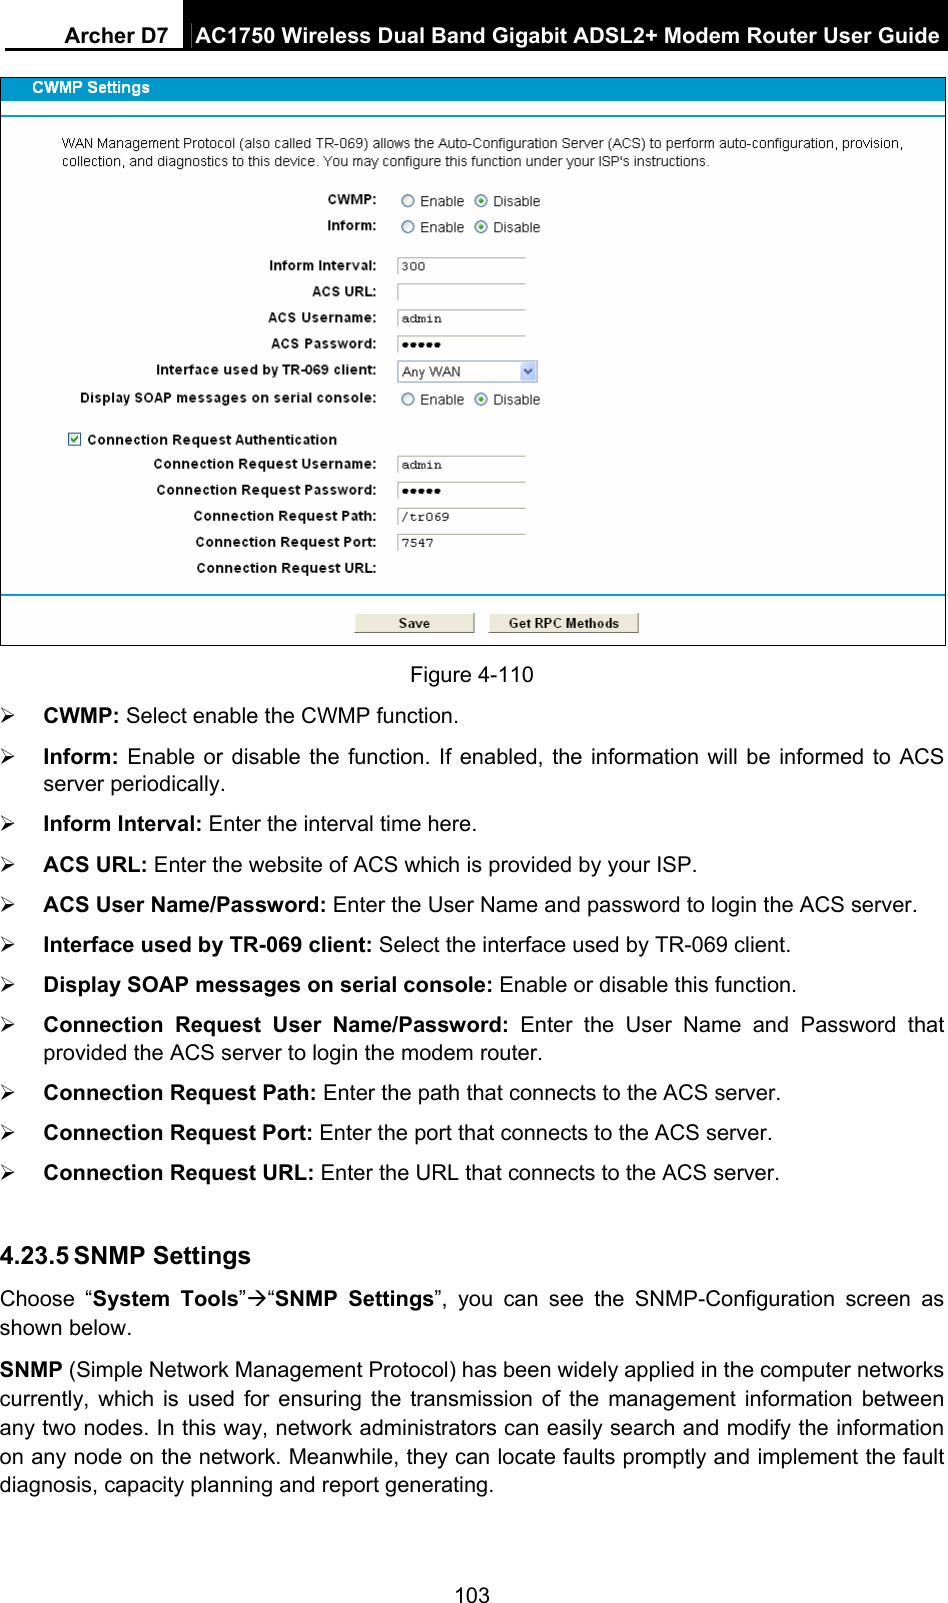 Archer D7  AC1750 Wireless Dual Band Gigabit ADSL2+ Modem Router User Guide 103  Figure 4-110  CWMP: Select enable the CWMP function.  Inform: Enable or disable the function. If enabled, the information will be informed to ACS server periodically.  Inform Interval: Enter the interval time here.  ACS URL: Enter the website of ACS which is provided by your ISP.  ACS User Name/Password: Enter the User Name and password to login the ACS server.  Interface used by TR-069 client: Select the interface used by TR-069 client.  Display SOAP messages on serial console: Enable or disable this function.  Connection Request User Name/Password: Enter the User Name and Password that provided the ACS server to login the modem router.  Connection Request Path: Enter the path that connects to the ACS server.  Connection Request Port: Enter the port that connects to the ACS server.  Connection Request URL: Enter the URL that connects to the ACS server.  4.23.5 SNMP Settings Choose “System Tools”“SNMP Settings”, you can see the SNMP-Configuration screen as shown below. SNMP (Simple Network Management Protocol) has been widely applied in the computer networks currently, which is used for ensuring the transmission of the management information between any two nodes. In this way, network administrators can easily search and modify the information on any node on the network. Meanwhile, they can locate faults promptly and implement the fault diagnosis, capacity planning and report generating. 